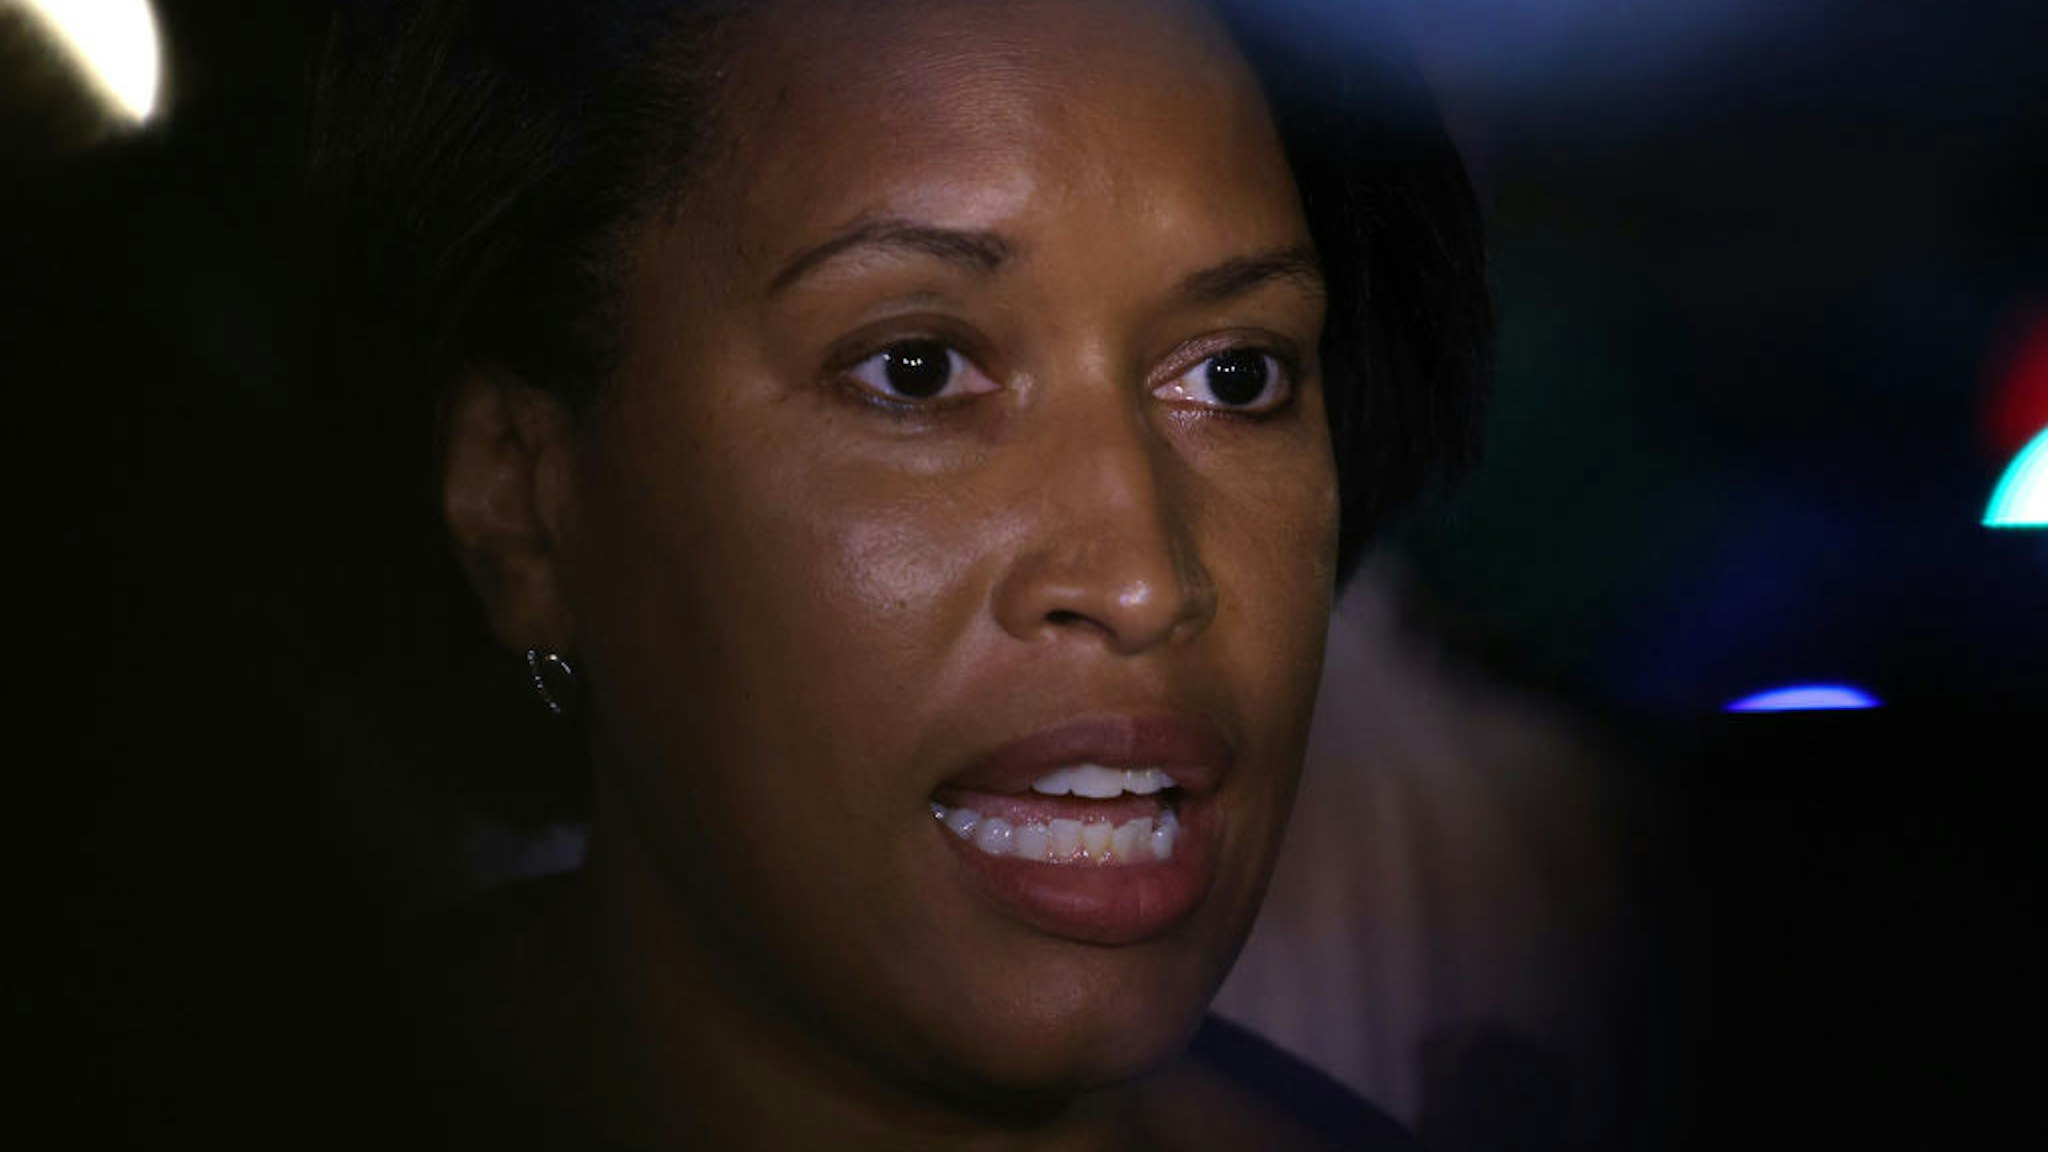 Mayor Muriel Bowser speaks to reporters after a shooting on July 22, 2021 in Washington, DC. Gunfire erupted on a busy street, injuring two and sending others fleeing for safety.